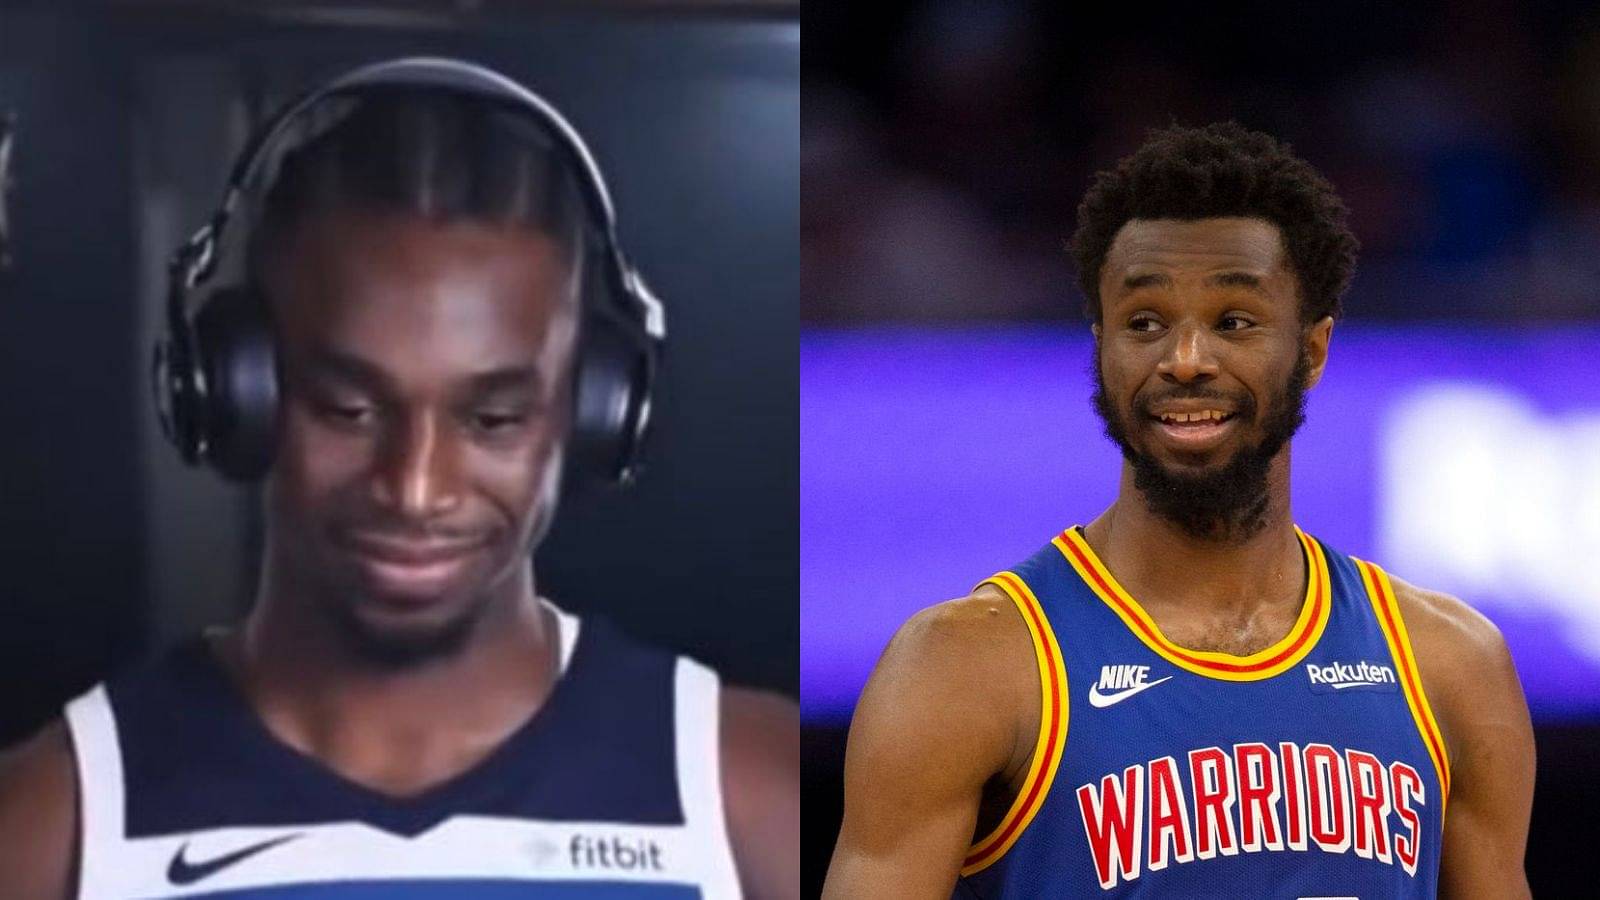 “Andrew Wiggins! That is a face when you remember your first love”: NBA Twitter digs up an old video of Warriors star choosing his favorite song